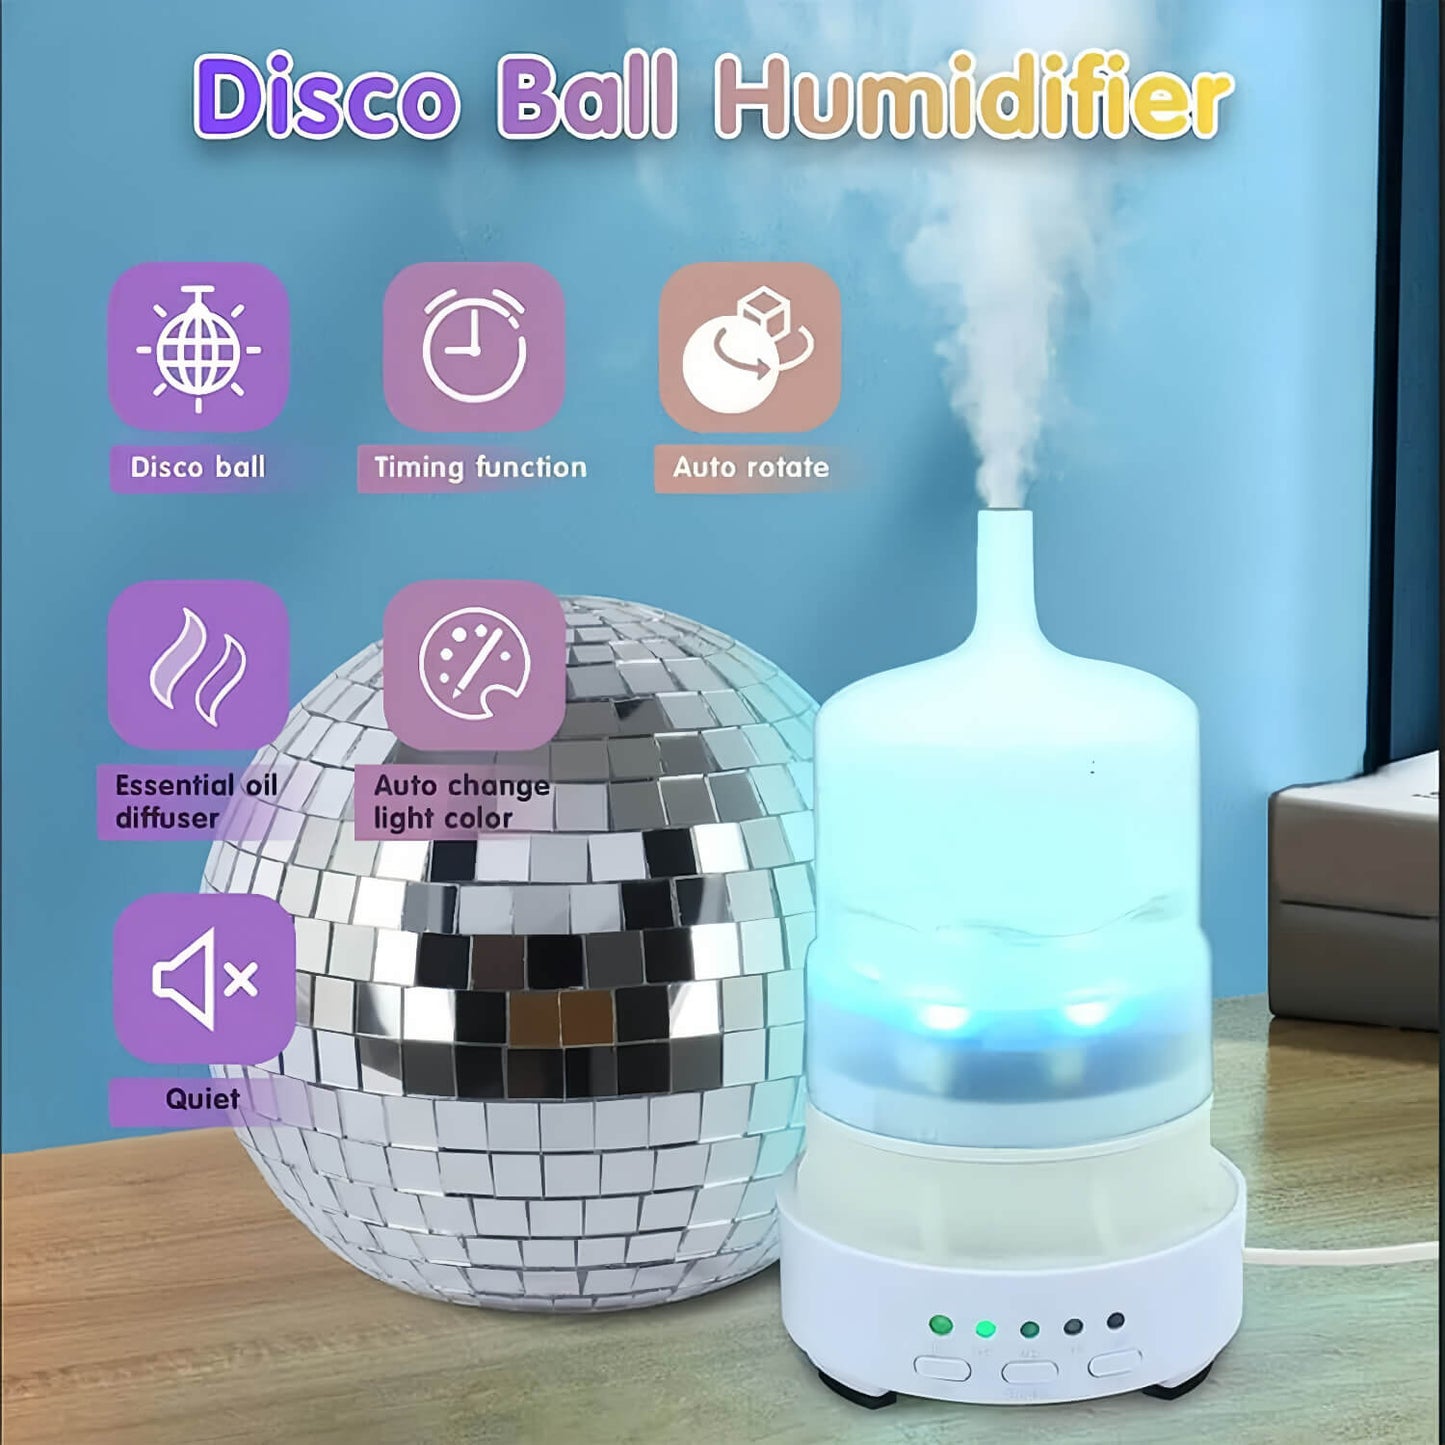 Disco Ball Aromatherapy Diffuser - Groovy party vibes at your fingertips!